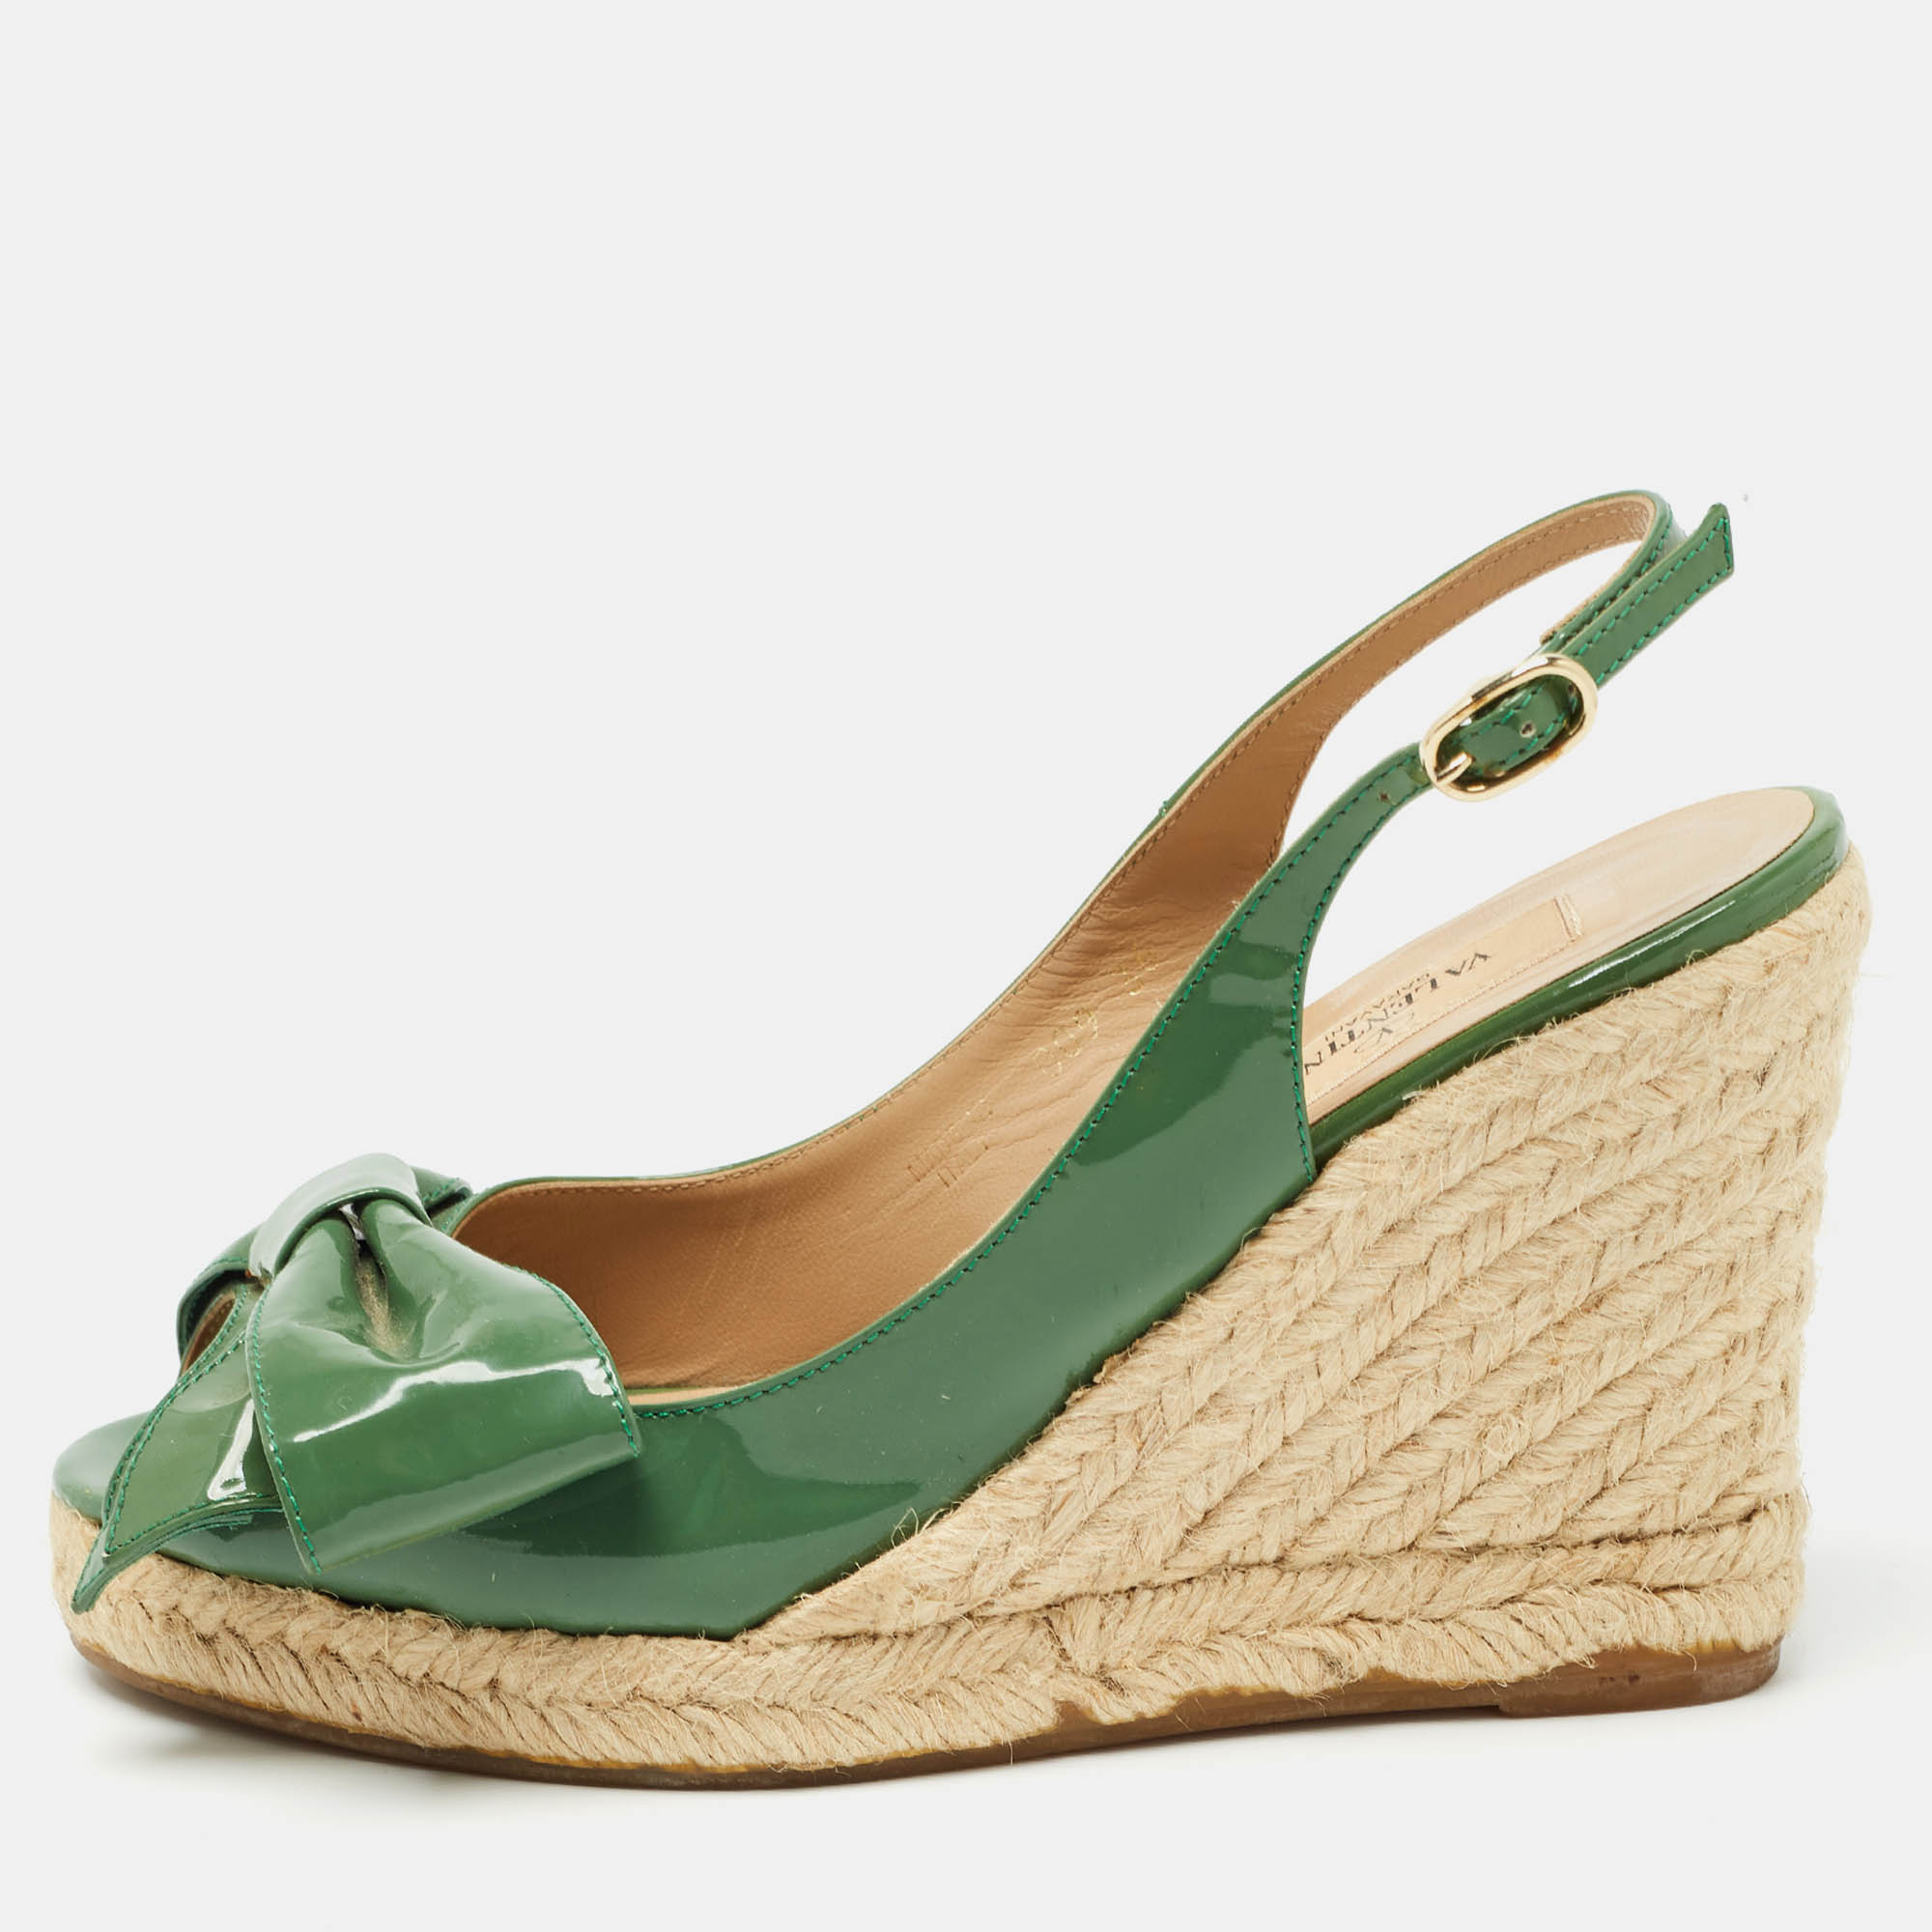 Valentino green patent leather mena bow espadrille wedge sandals size 36